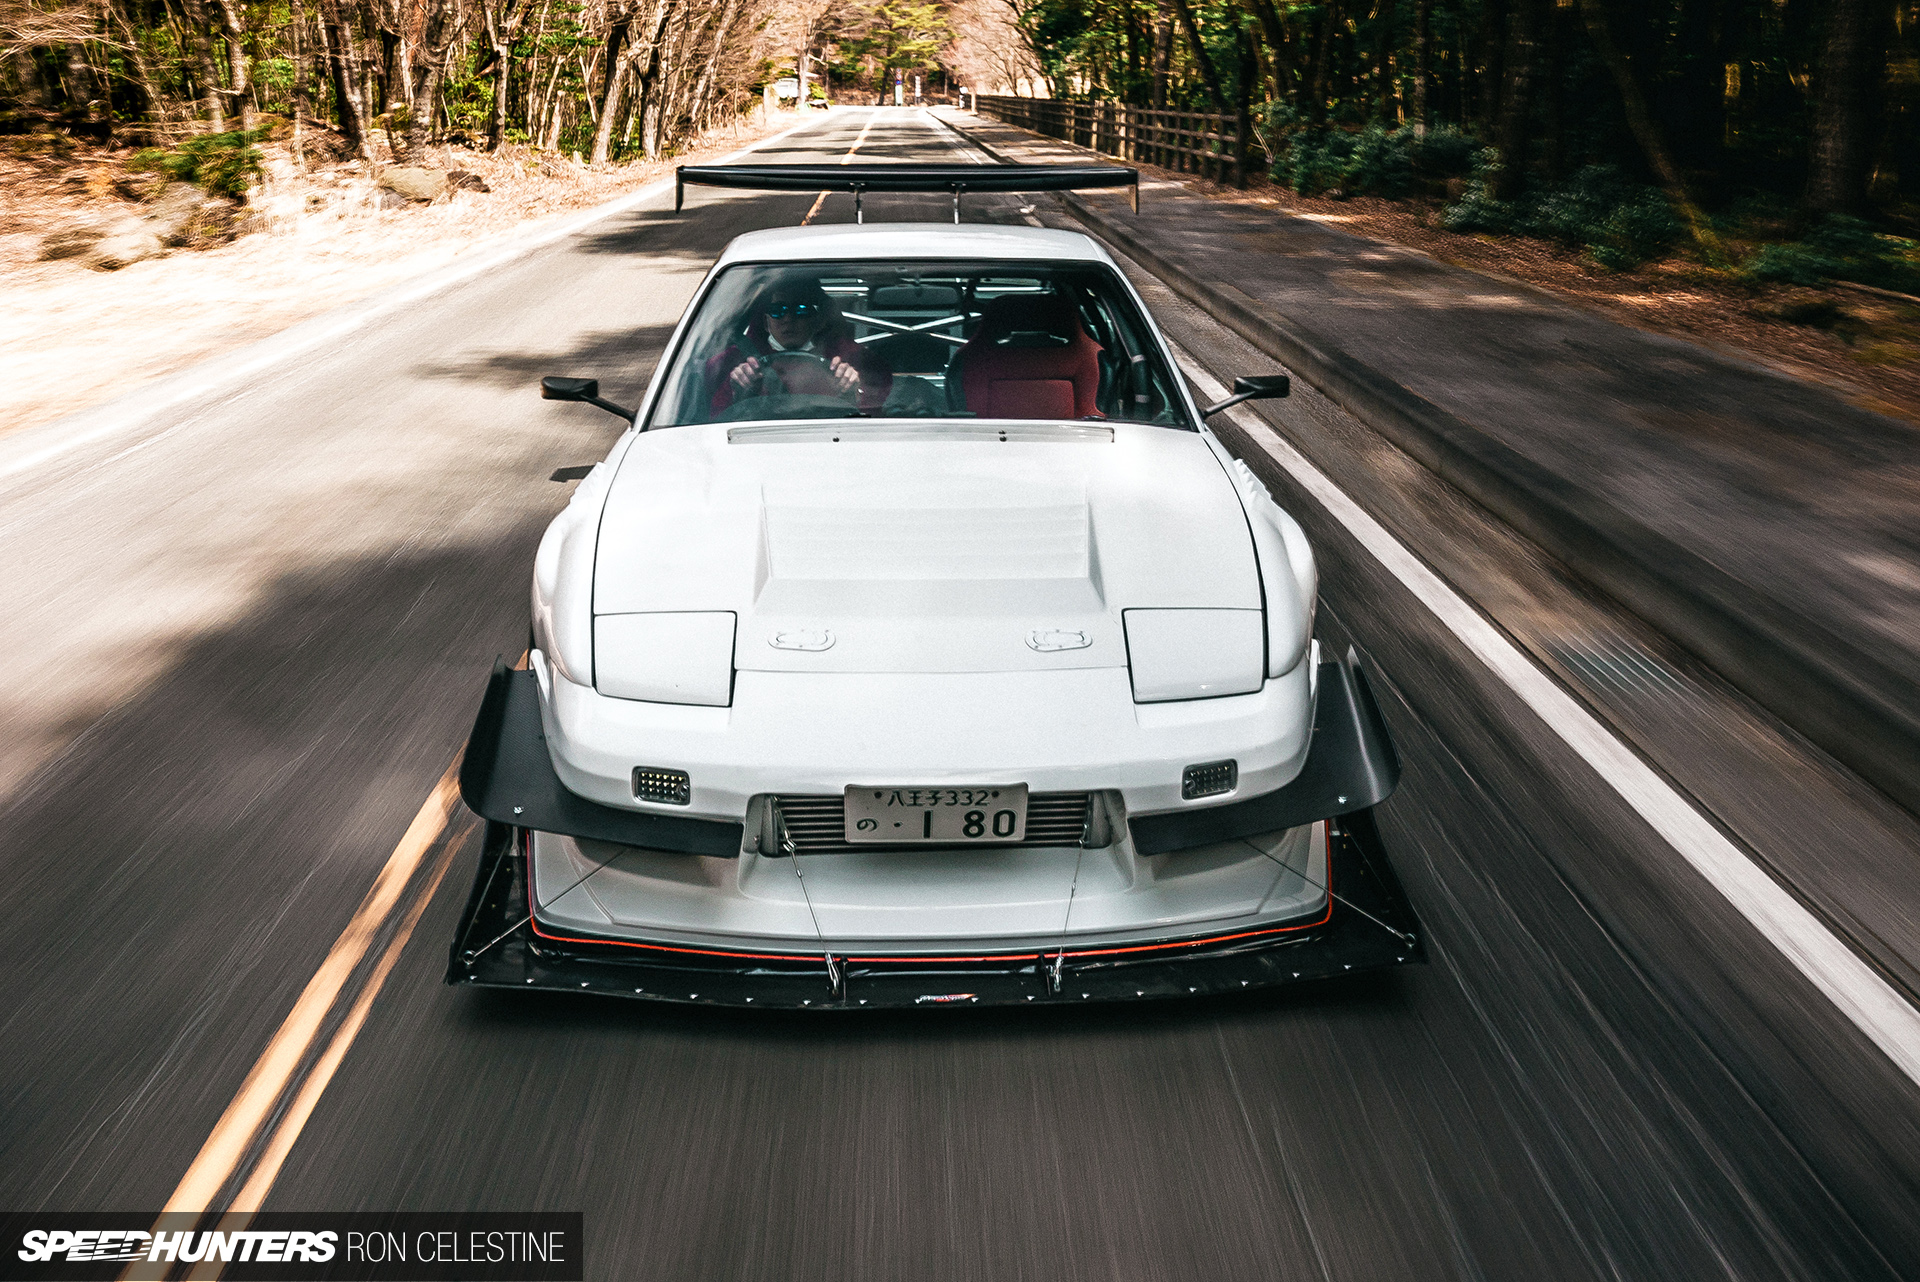 Stereotypes With A Time Attack - Speedhunters